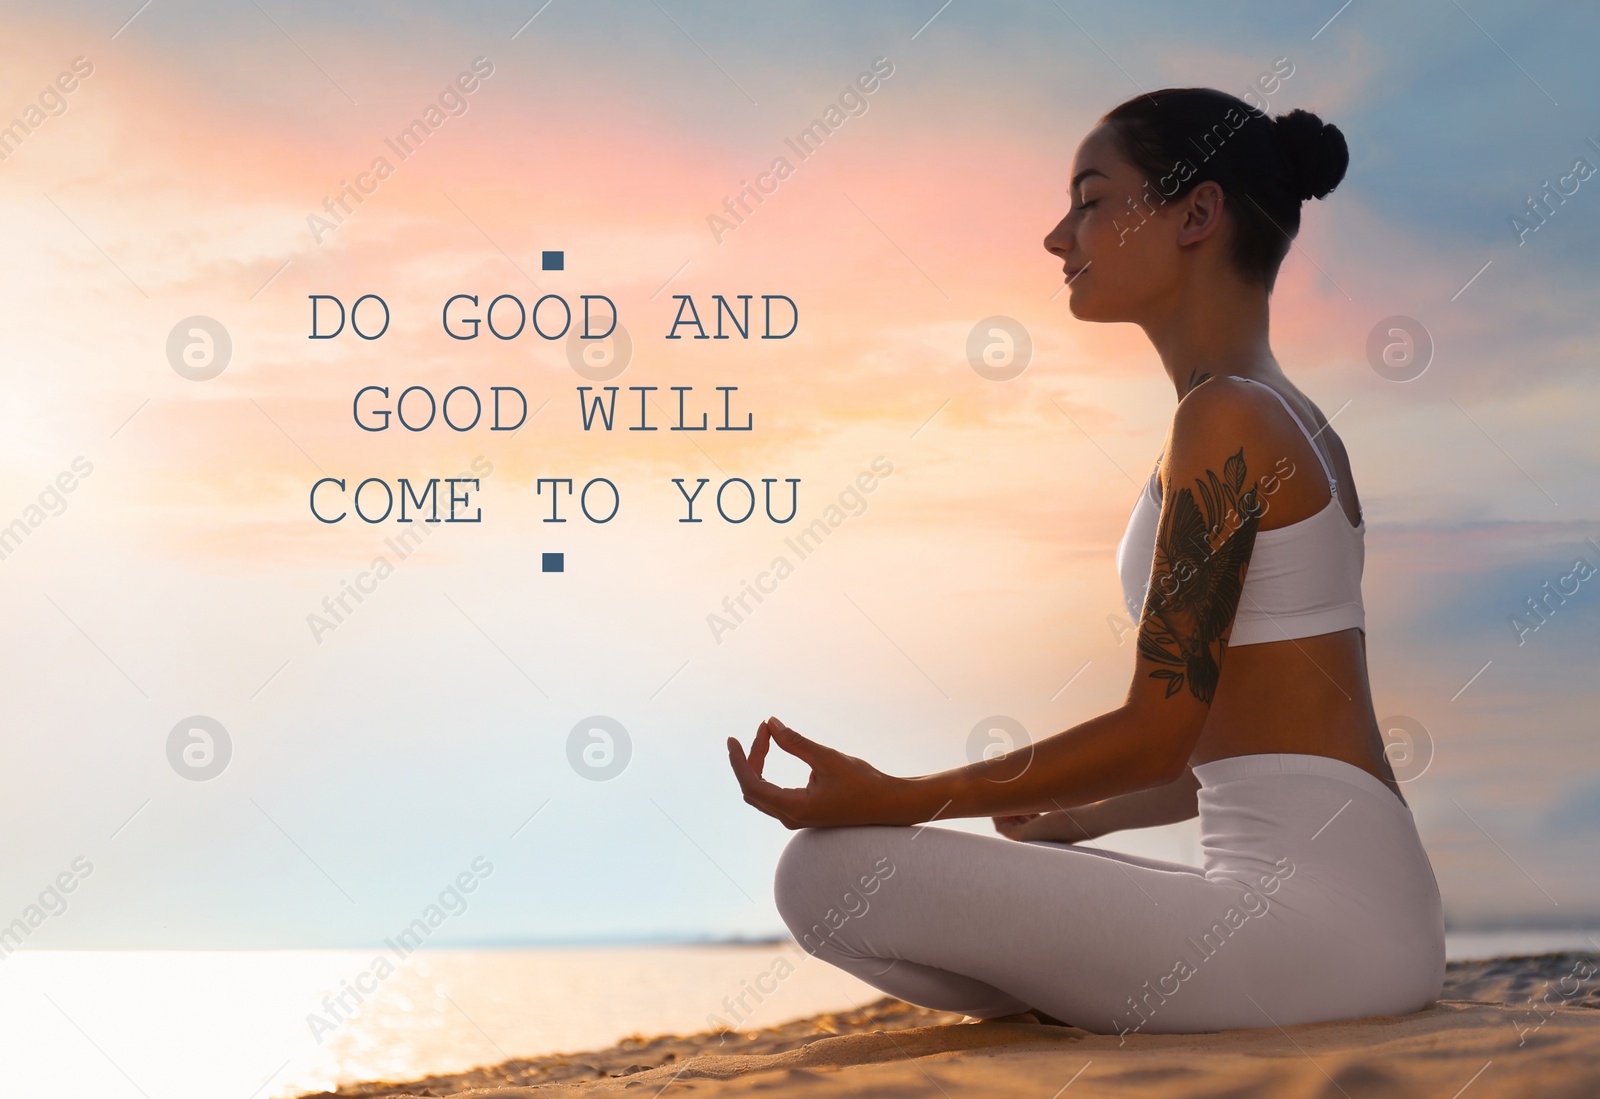 Image of Do Good And Good Will Come To You. Inspirational quote reminding about great balance in universe. Text against view of woman meditating near river in morning